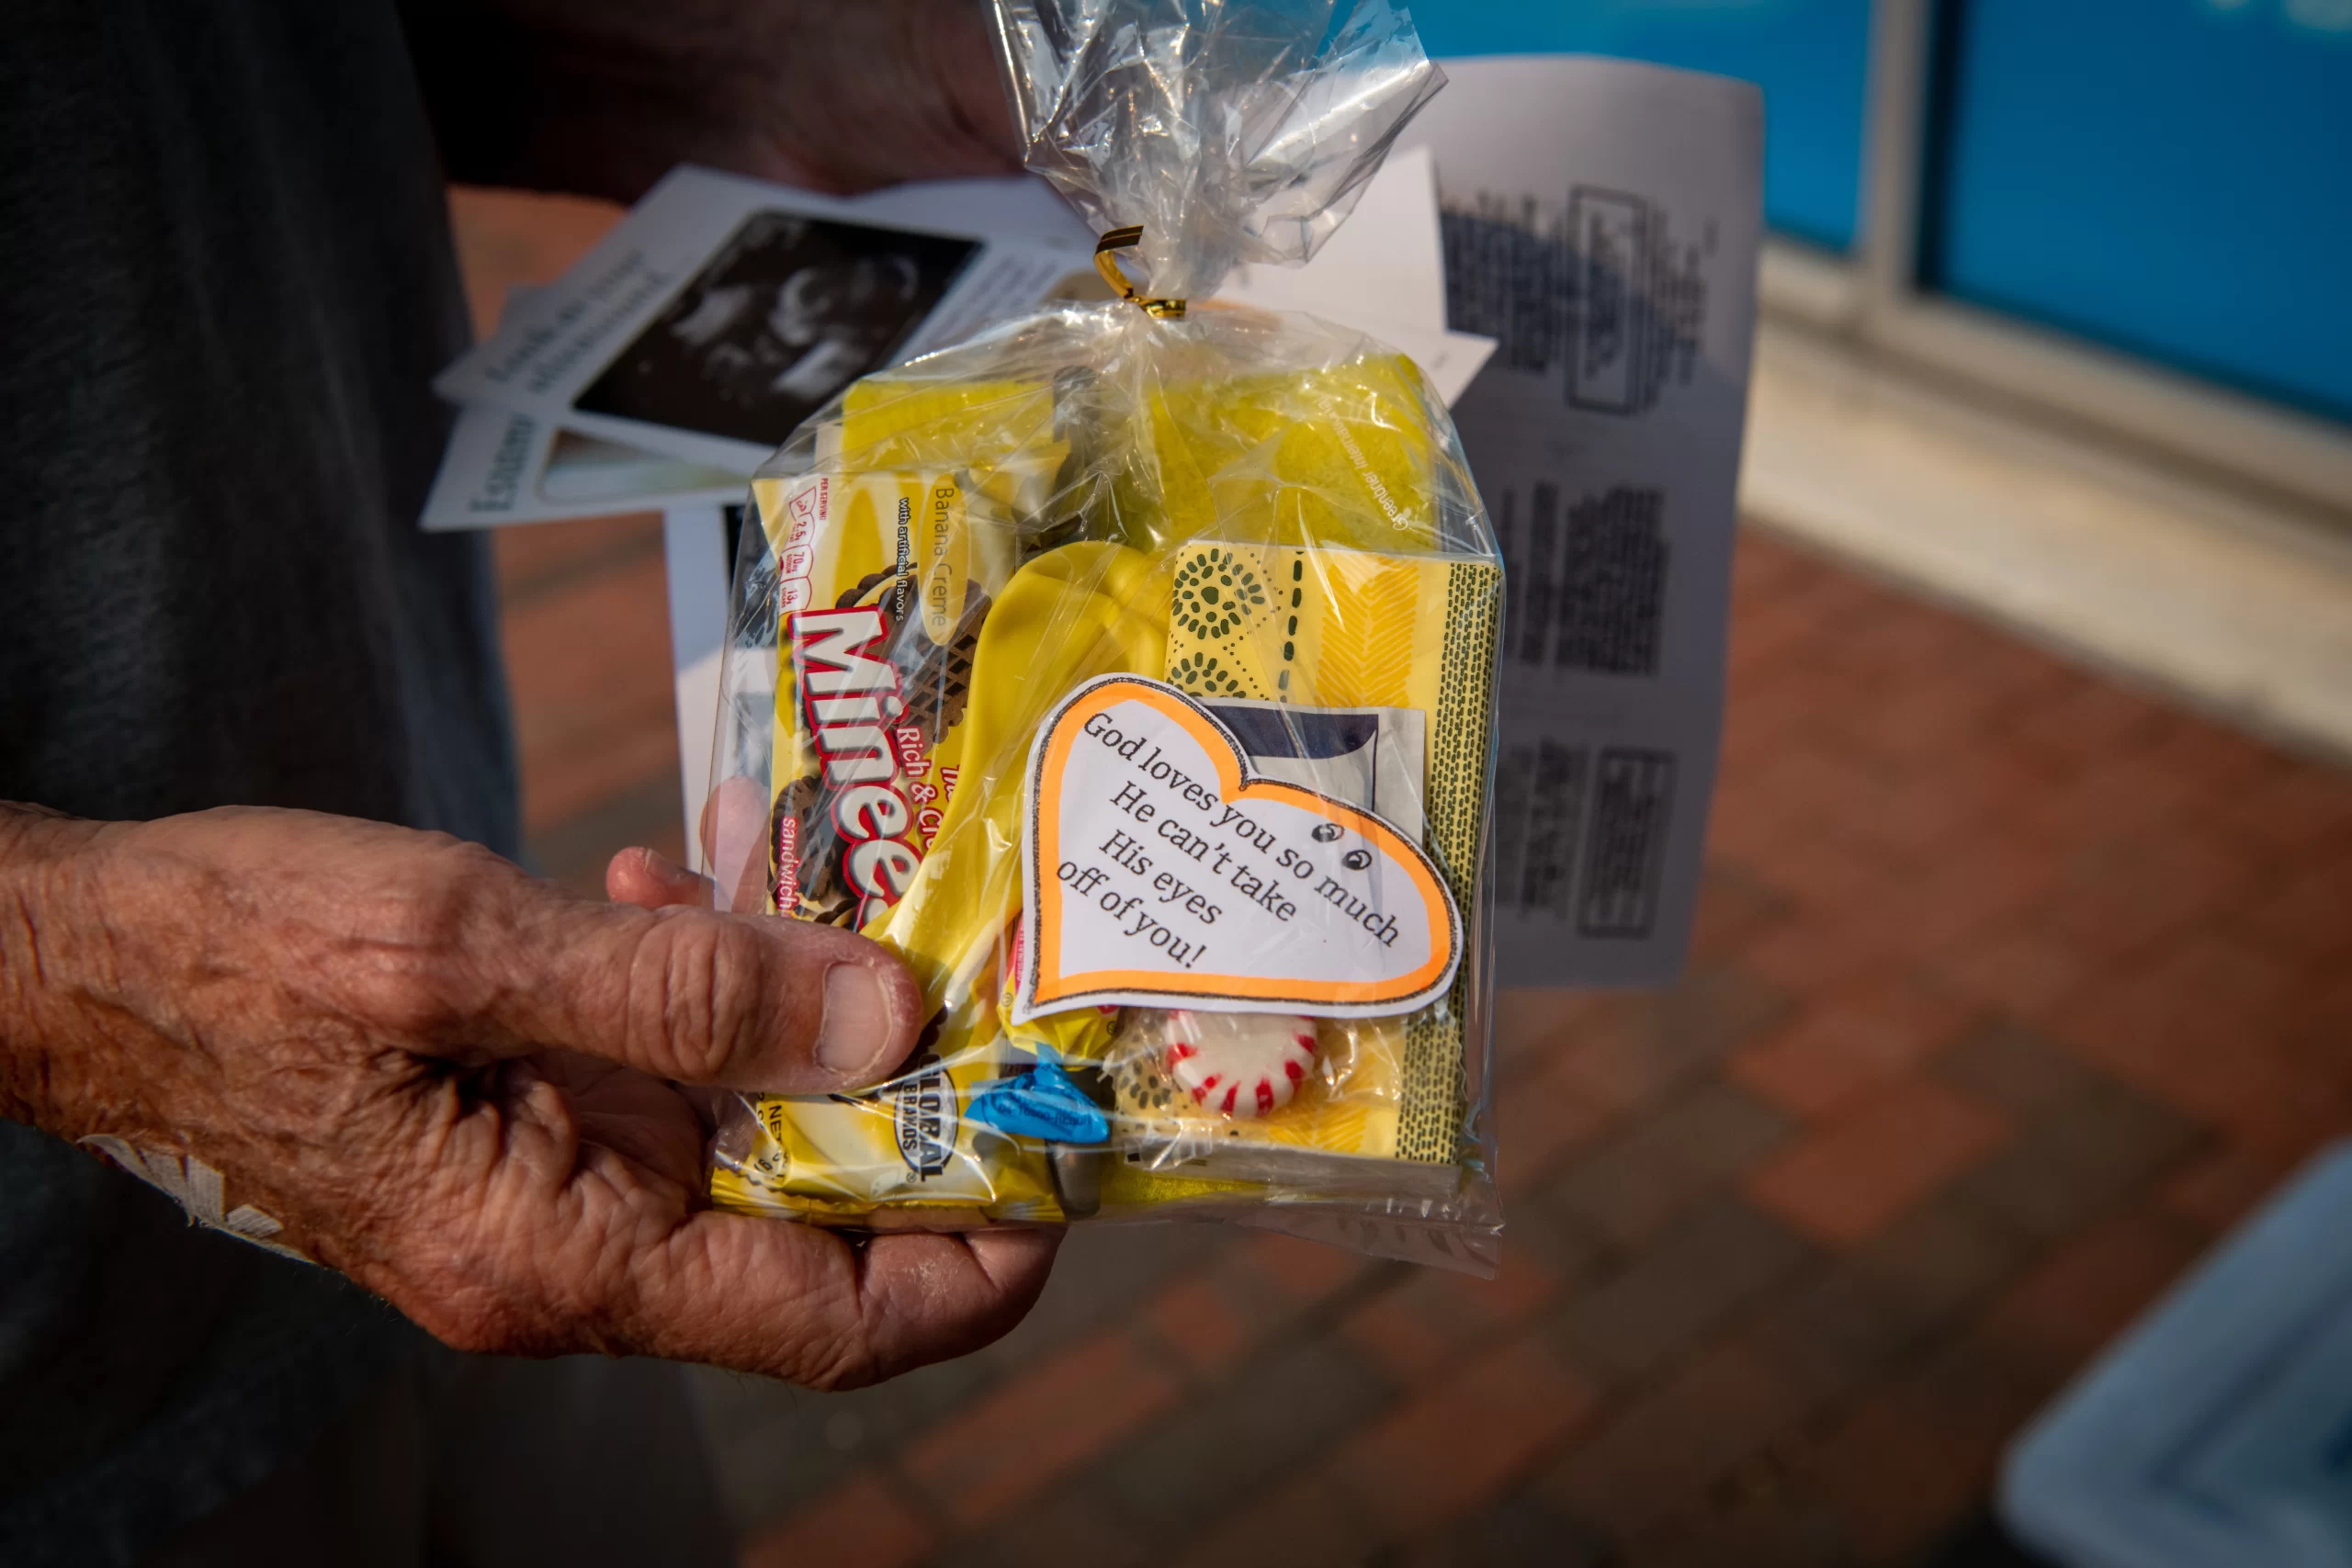 A sample of the items 80-year-old Dick Schafer hands out in front of the Planned Parenthood facility in Baltimore. Credit: Eric Stocklin/CNA